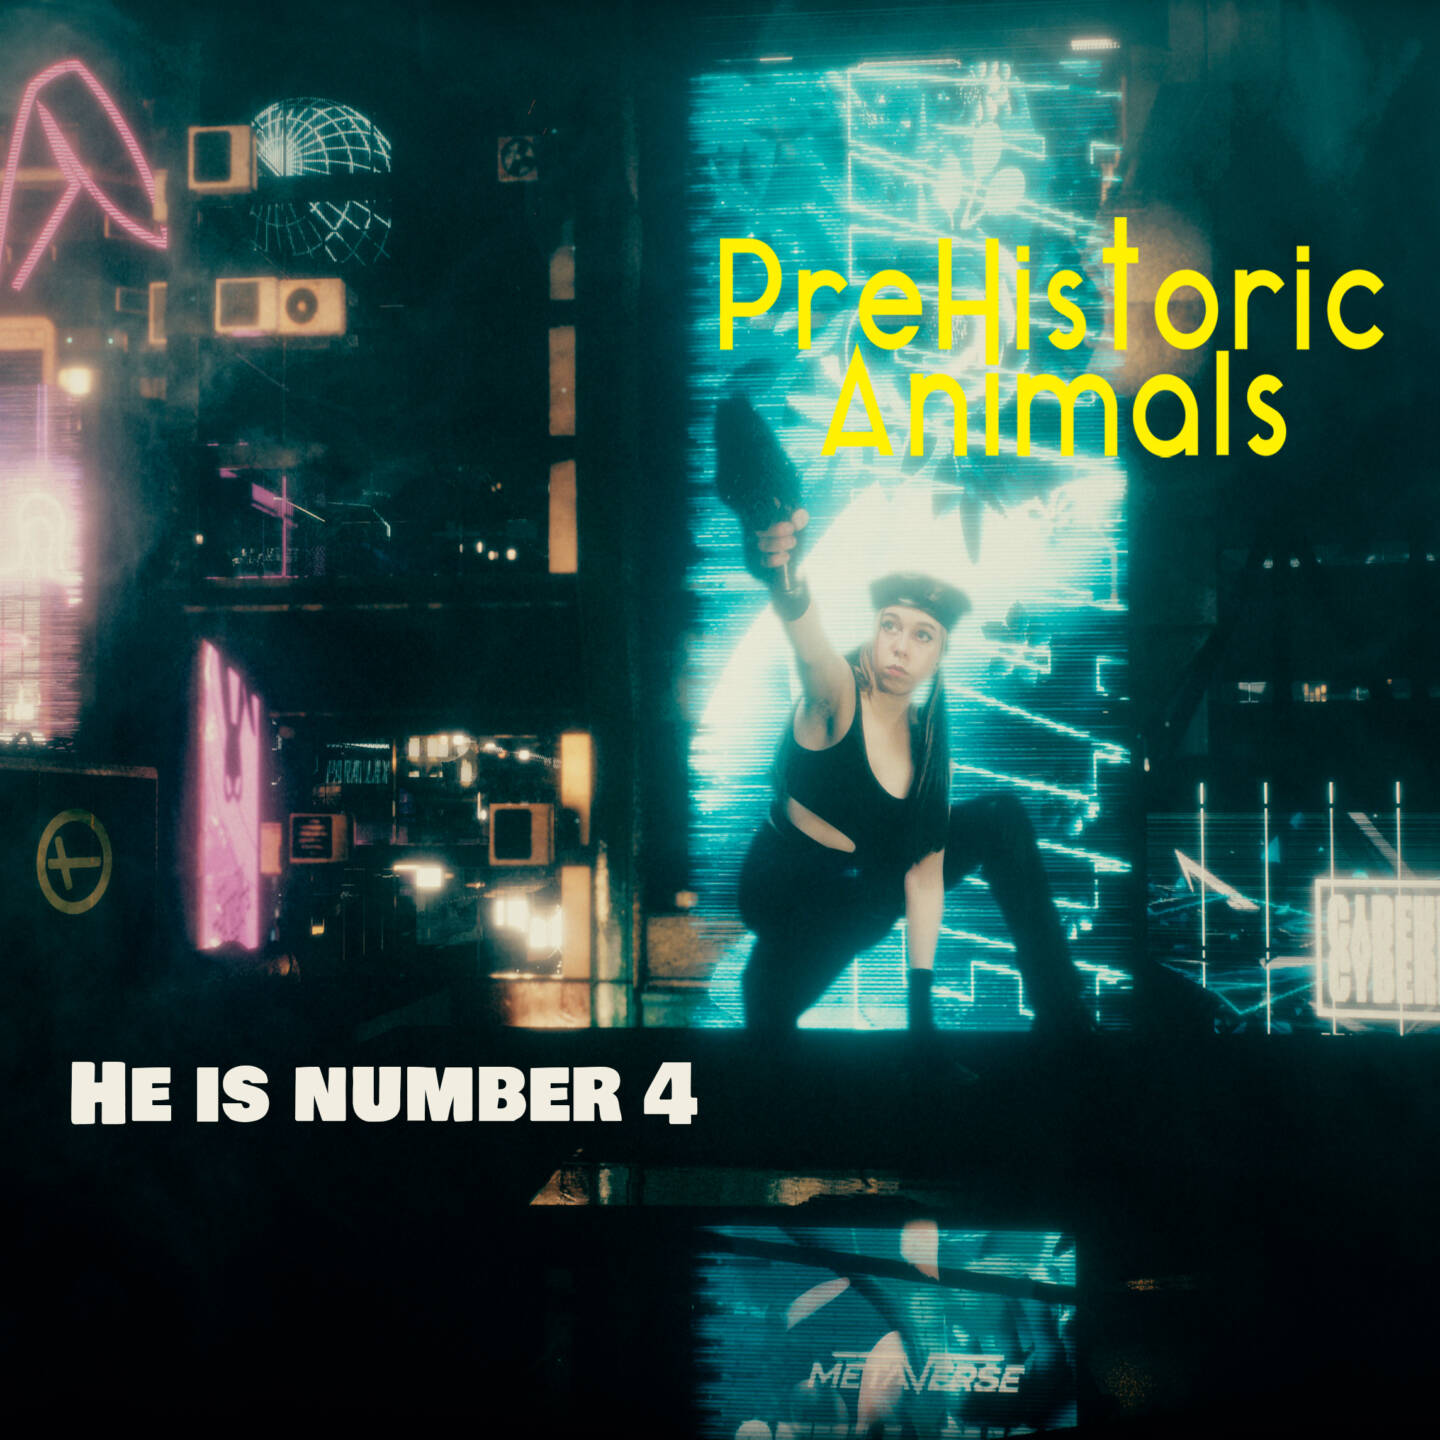 PreHistoric Animals premiere brand new video for He is number 4